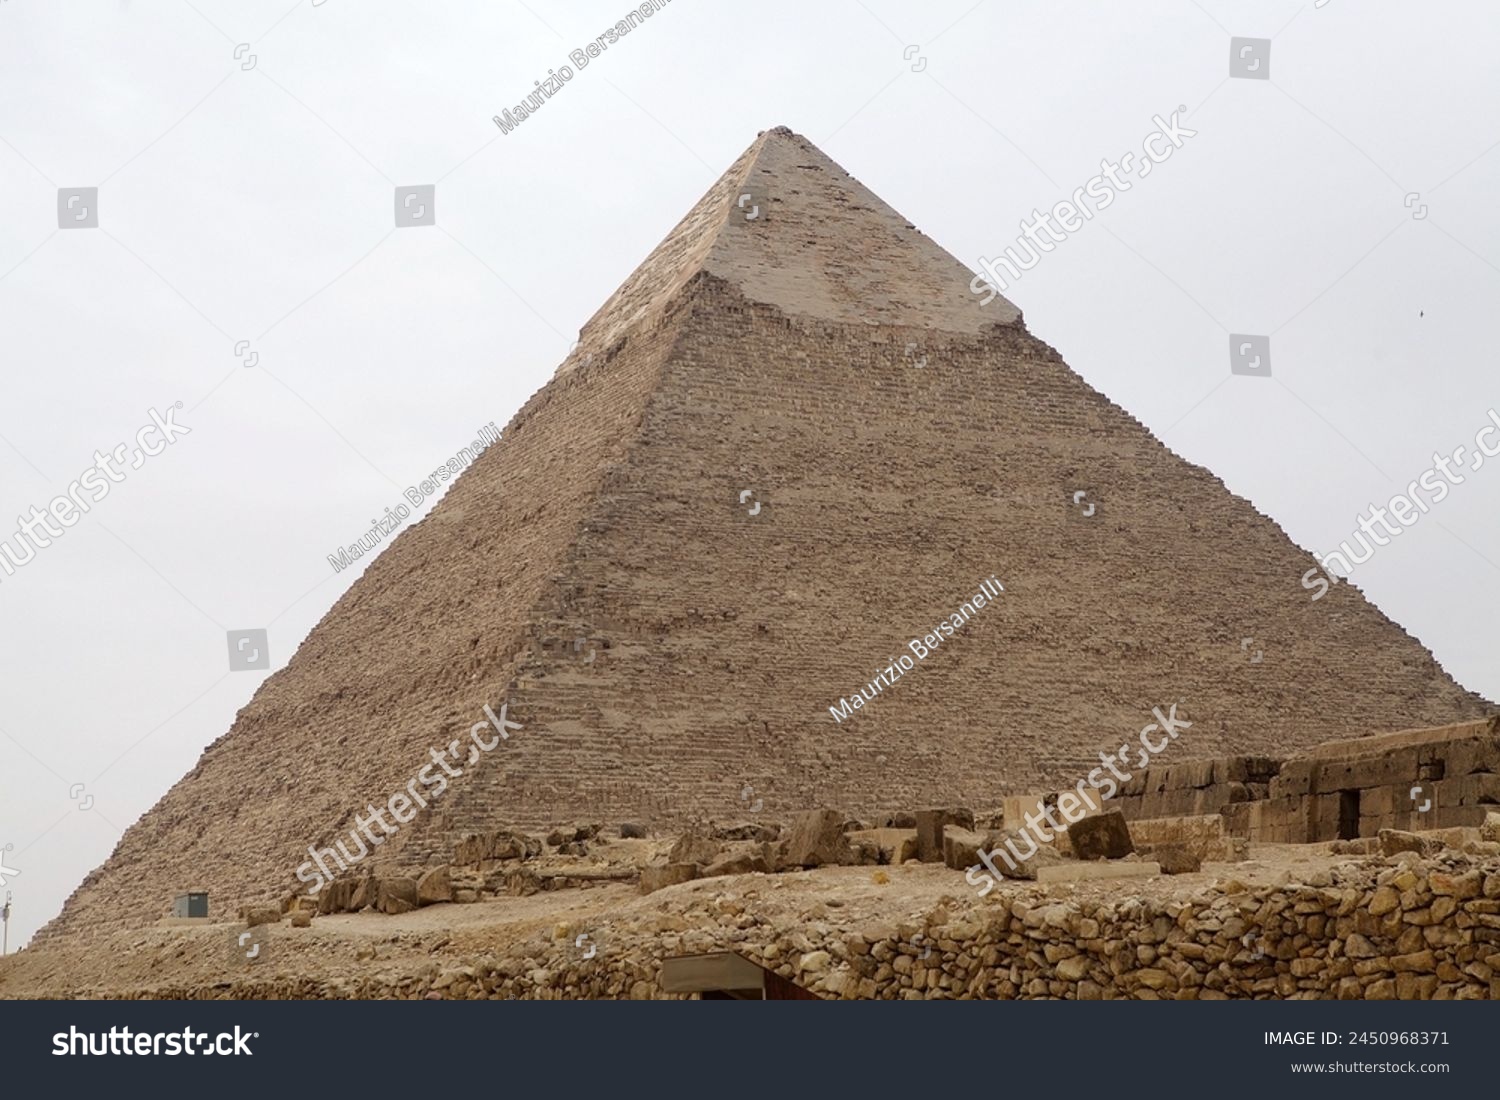 The Pyramid of Khefre at the Giza Pyramid Complex in Giza, Egypt, also called the Giza Necropolis. It was built during the Fourth Dynasty of the Old Kingdom #2450968371